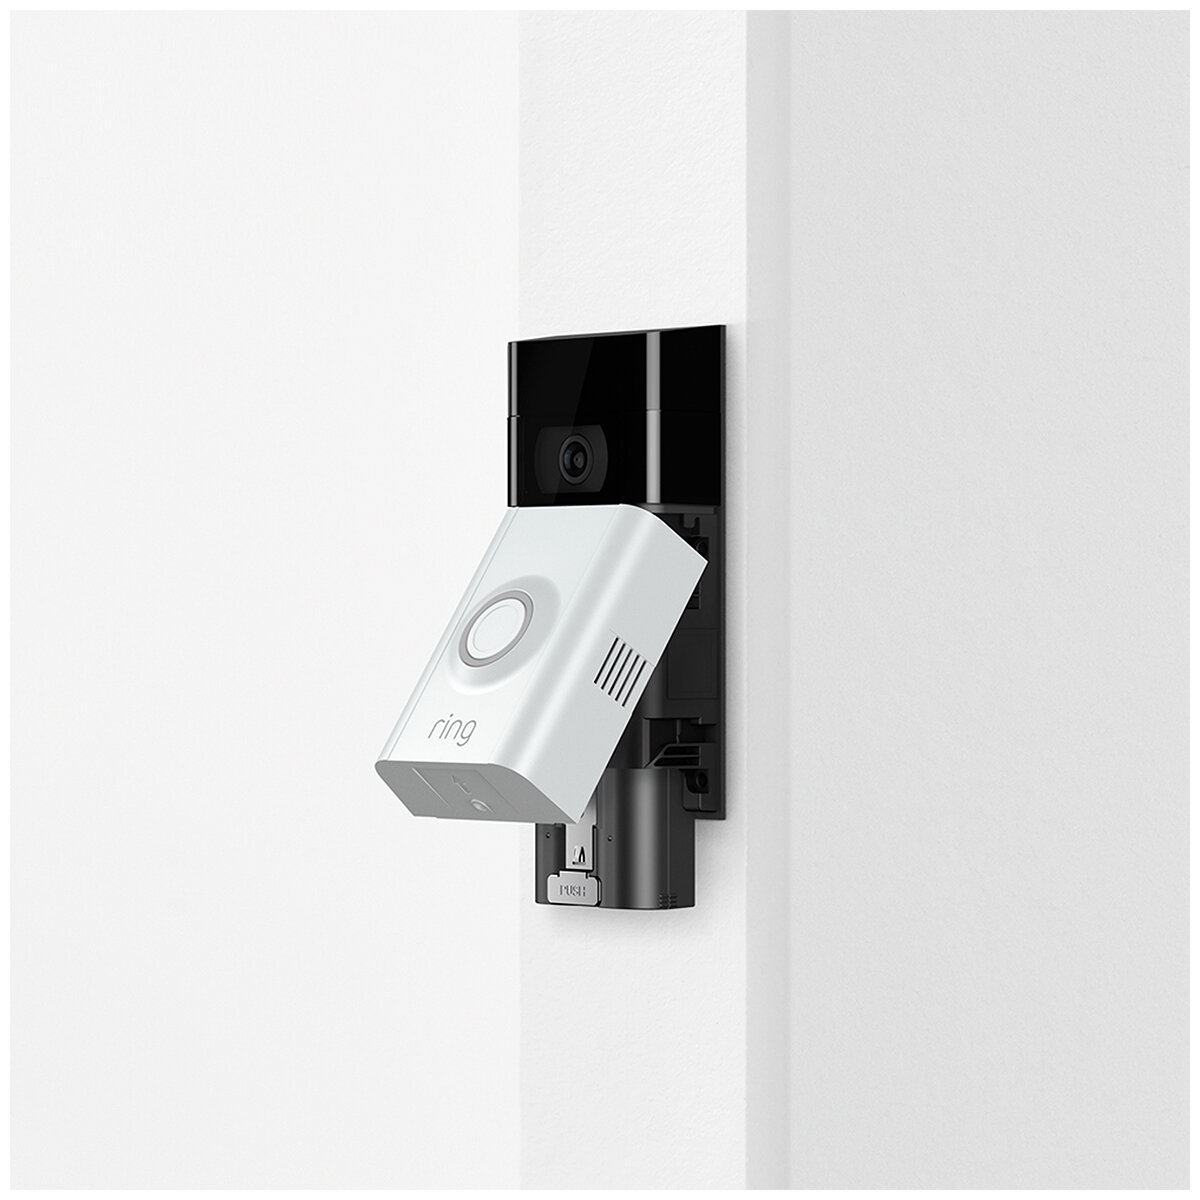 166302 Ring Video Doorbell Plus with Chime Pro and Quick Release Battery